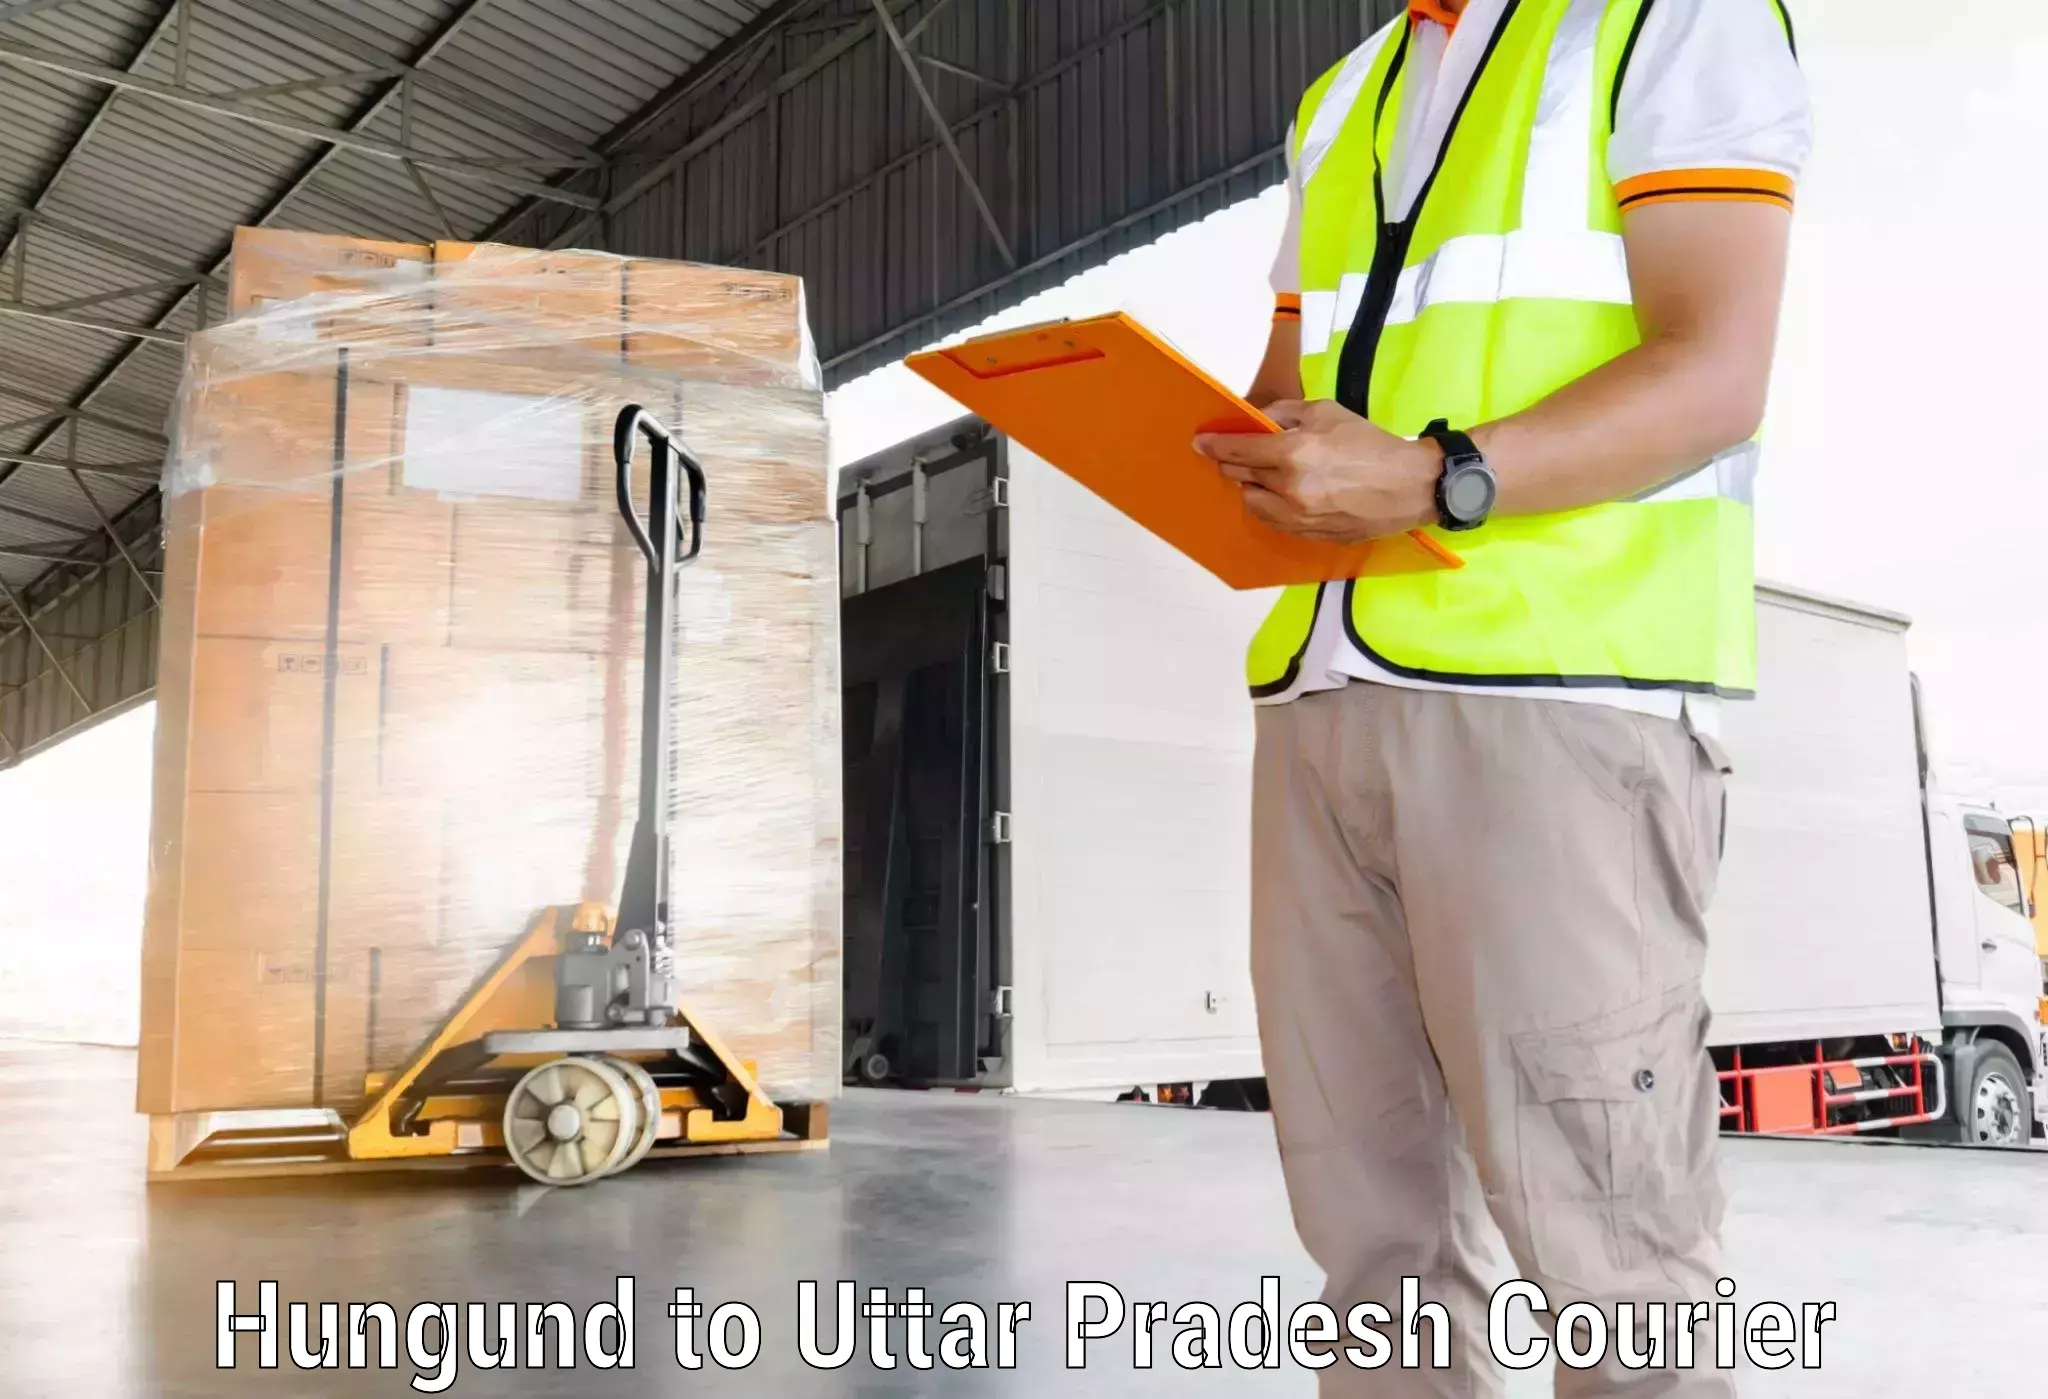 Express delivery capabilities in Hungund to Jhansi